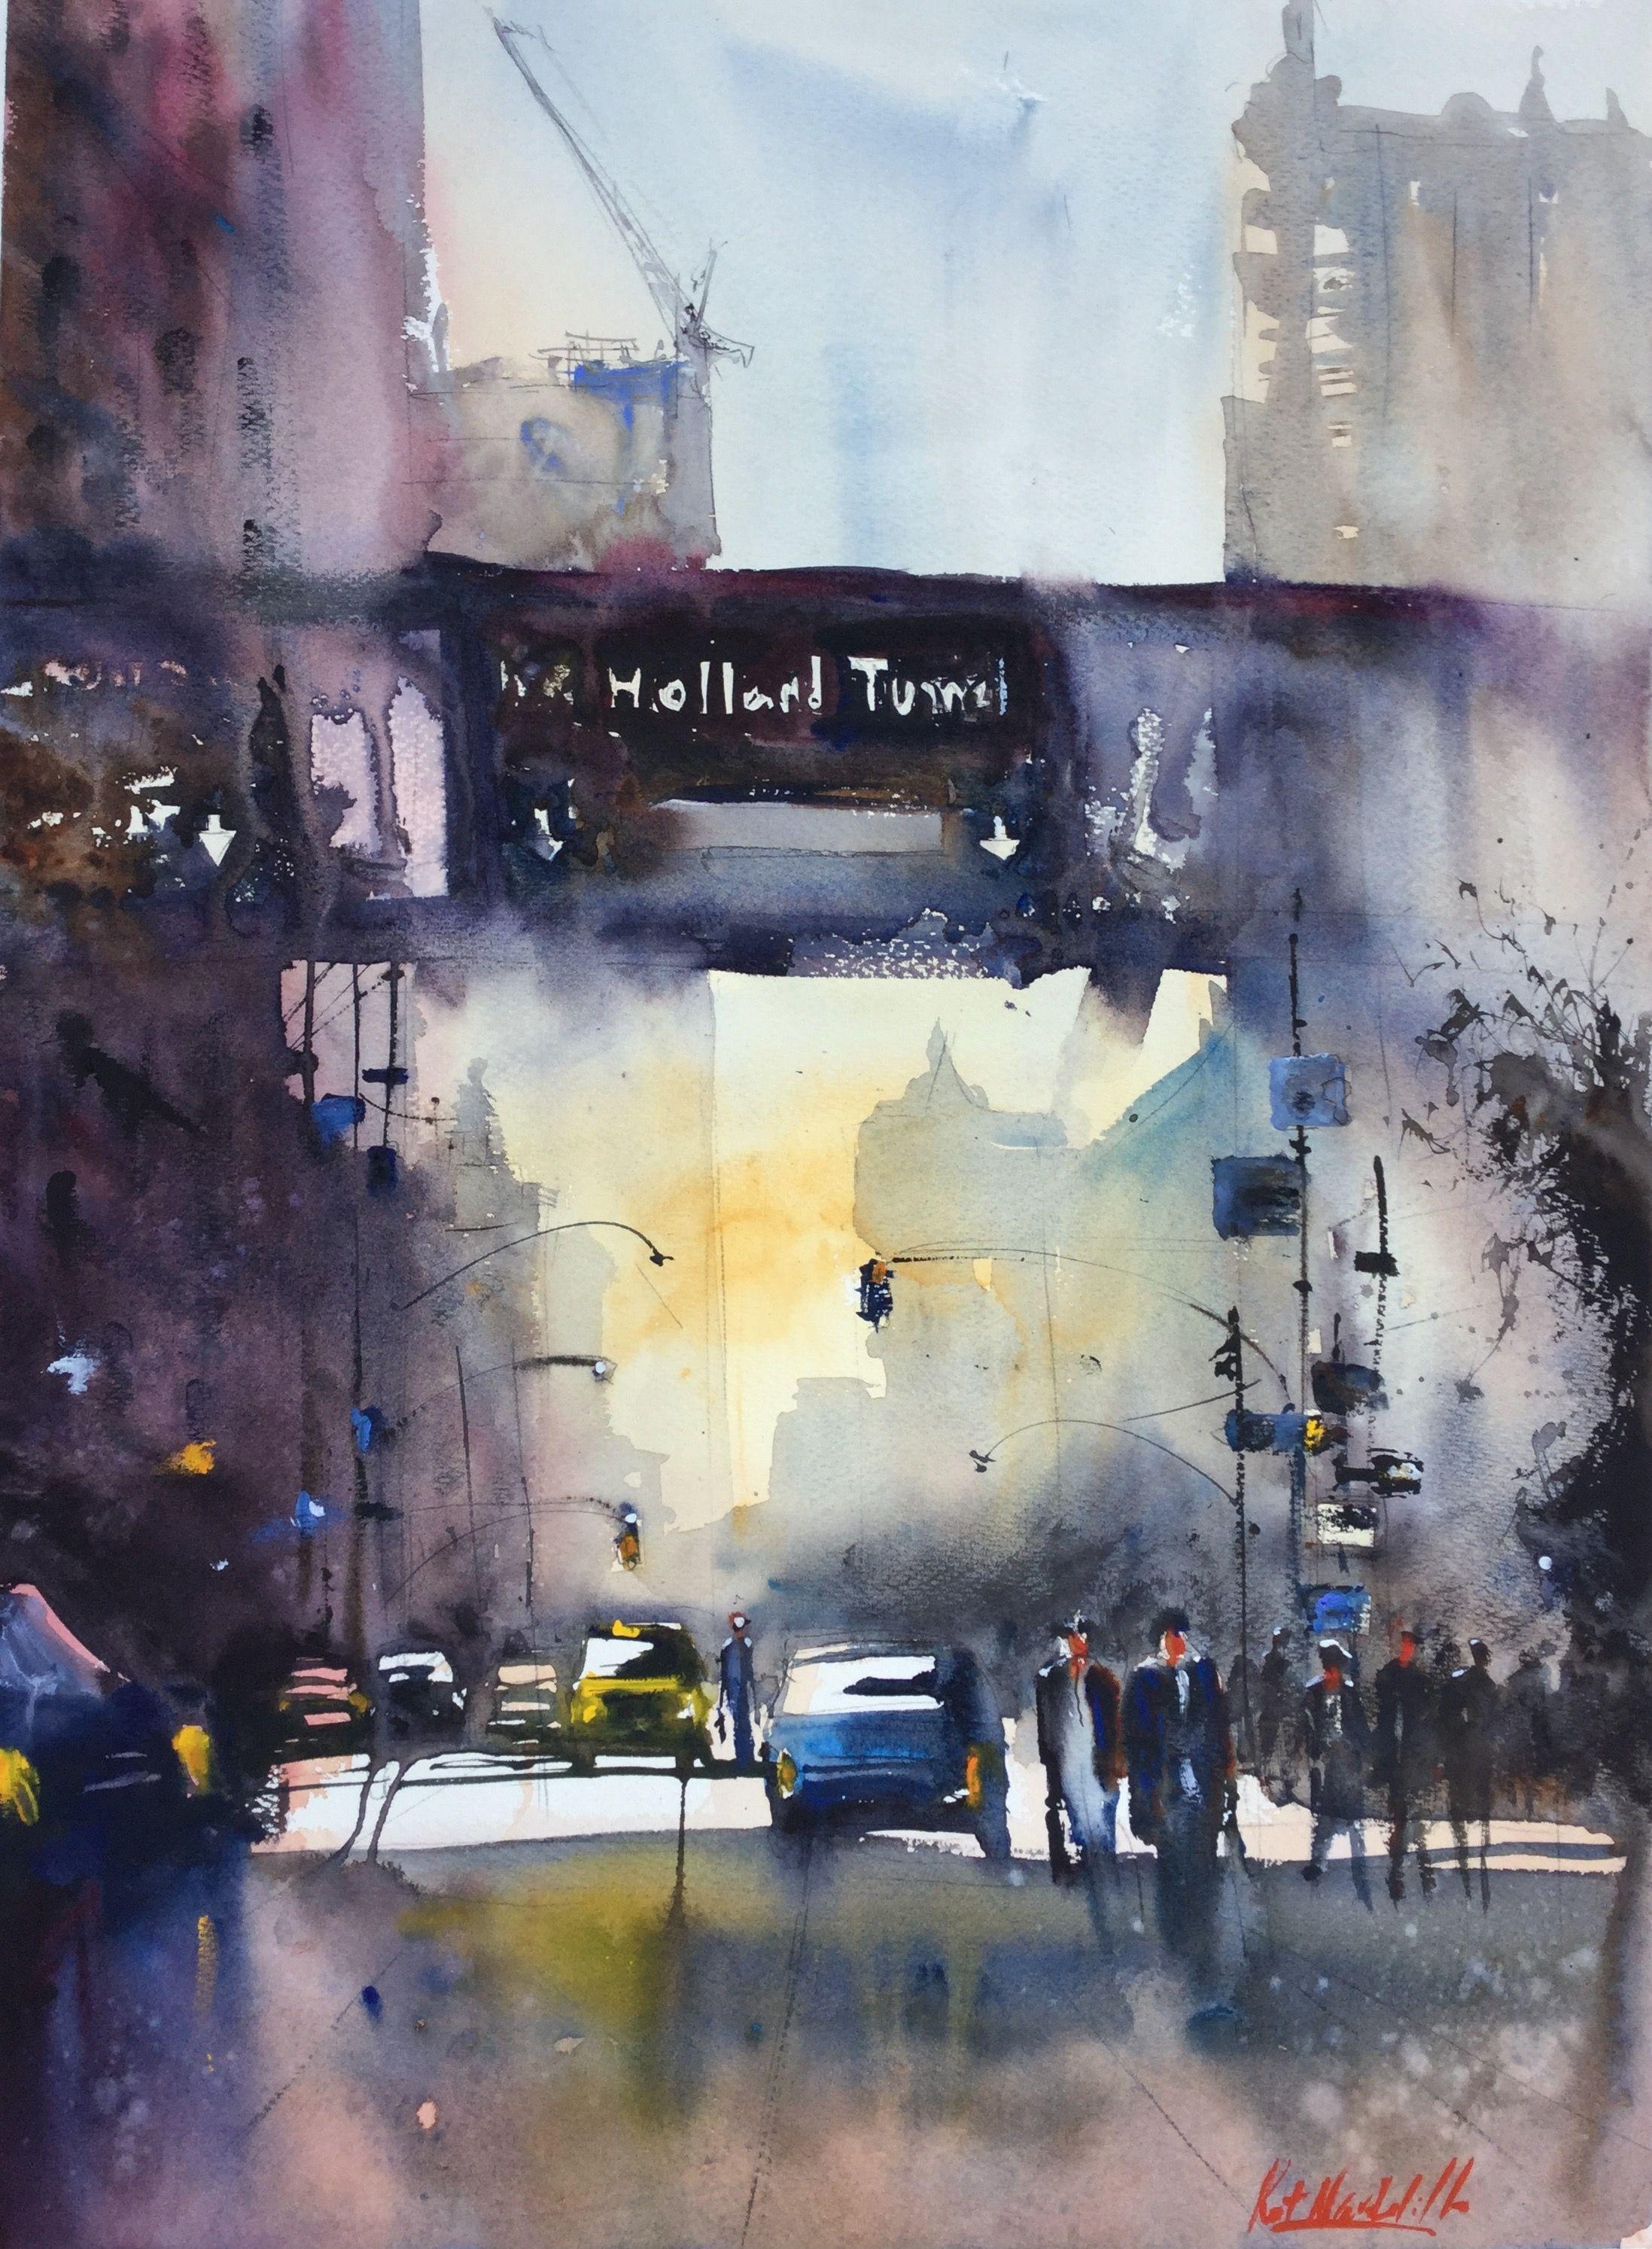 Holland Tunnel NYC, Painting, Watercolor on Paper - Art by Robert Nardolillo